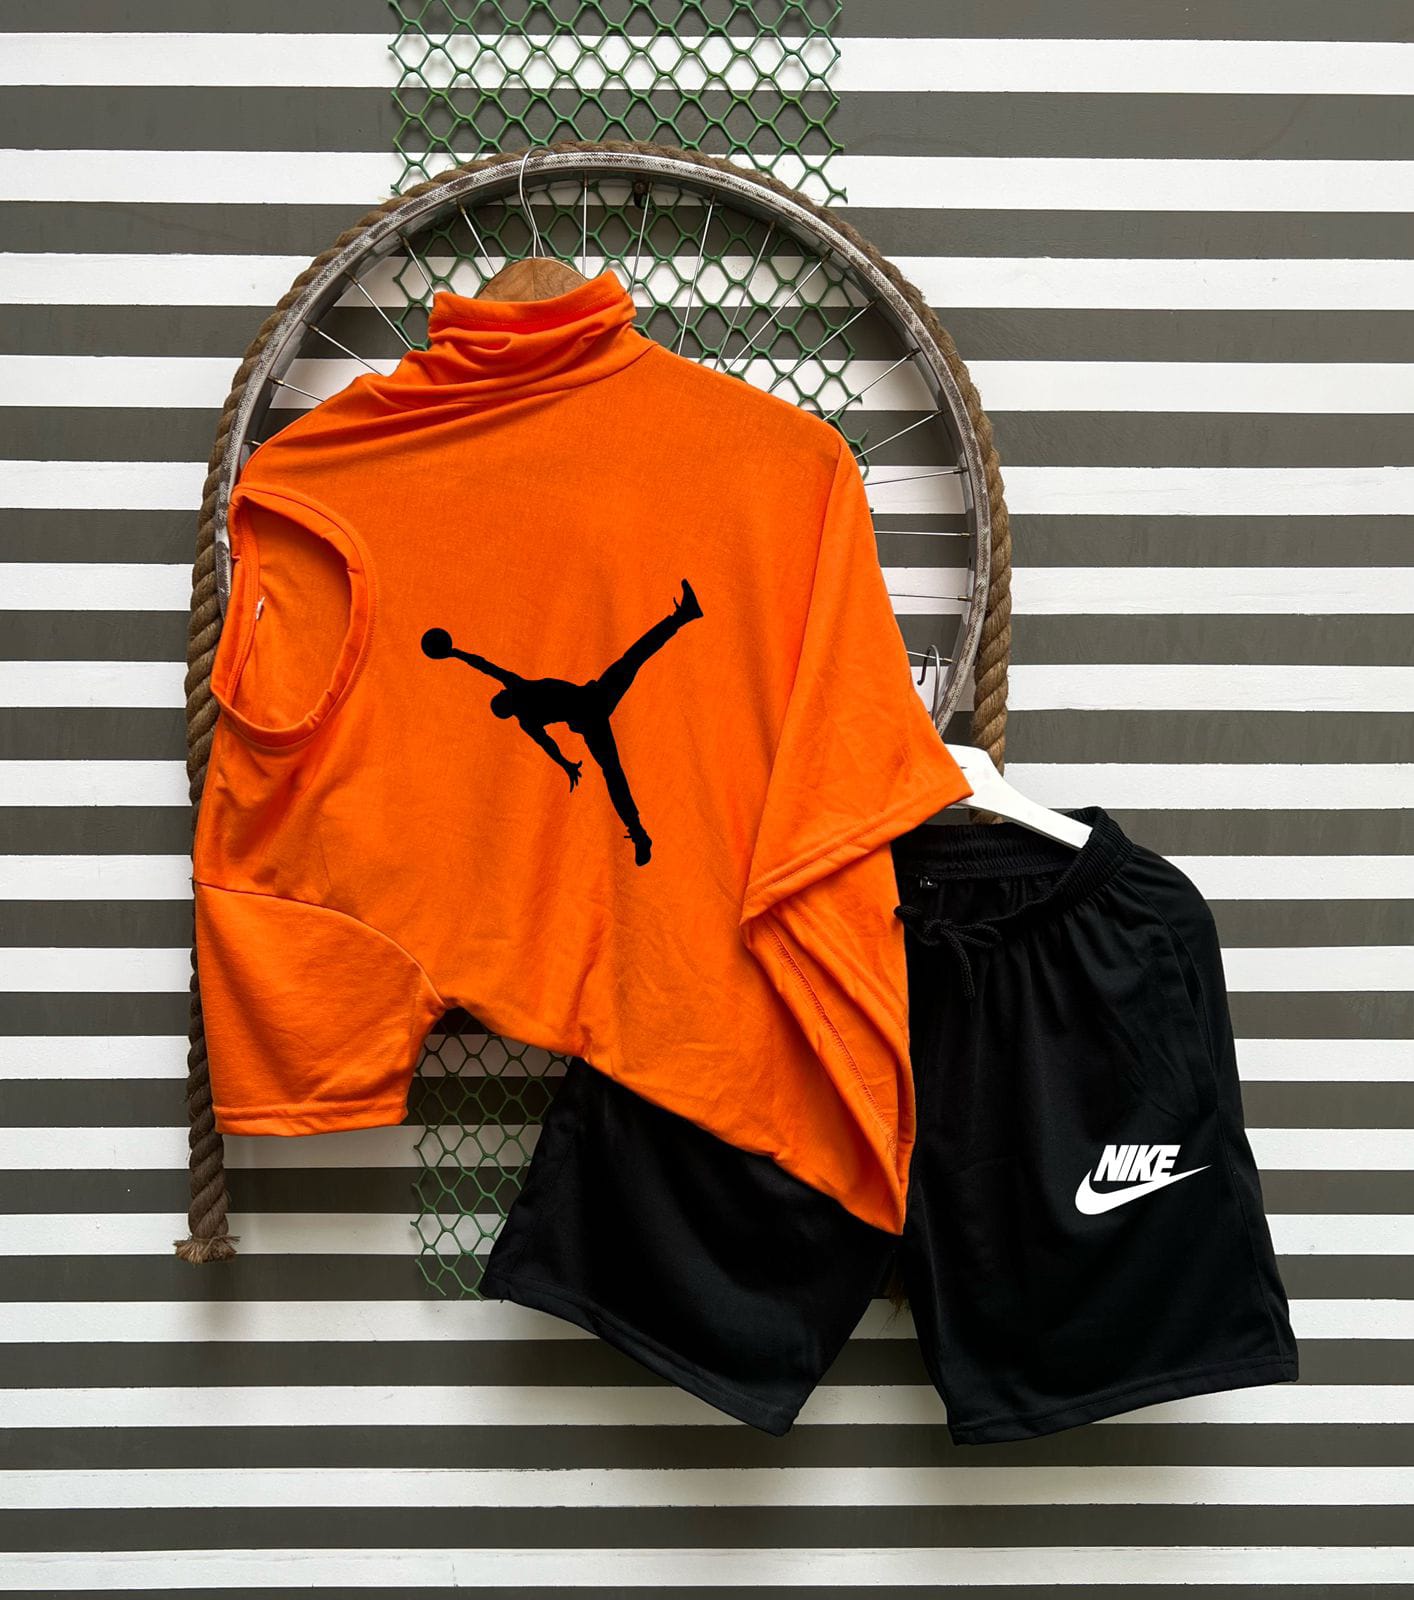 Details View - Nike T-SHIRTS AND SHORTS COMBO photos - reseller,reseller marketplace,advetising your products,reseller bazzar,resellerbazzar.in,india's classified site,nike tshirt | nike tshirt men | nike tshirt boys | nike shorts | nike shorts for men 